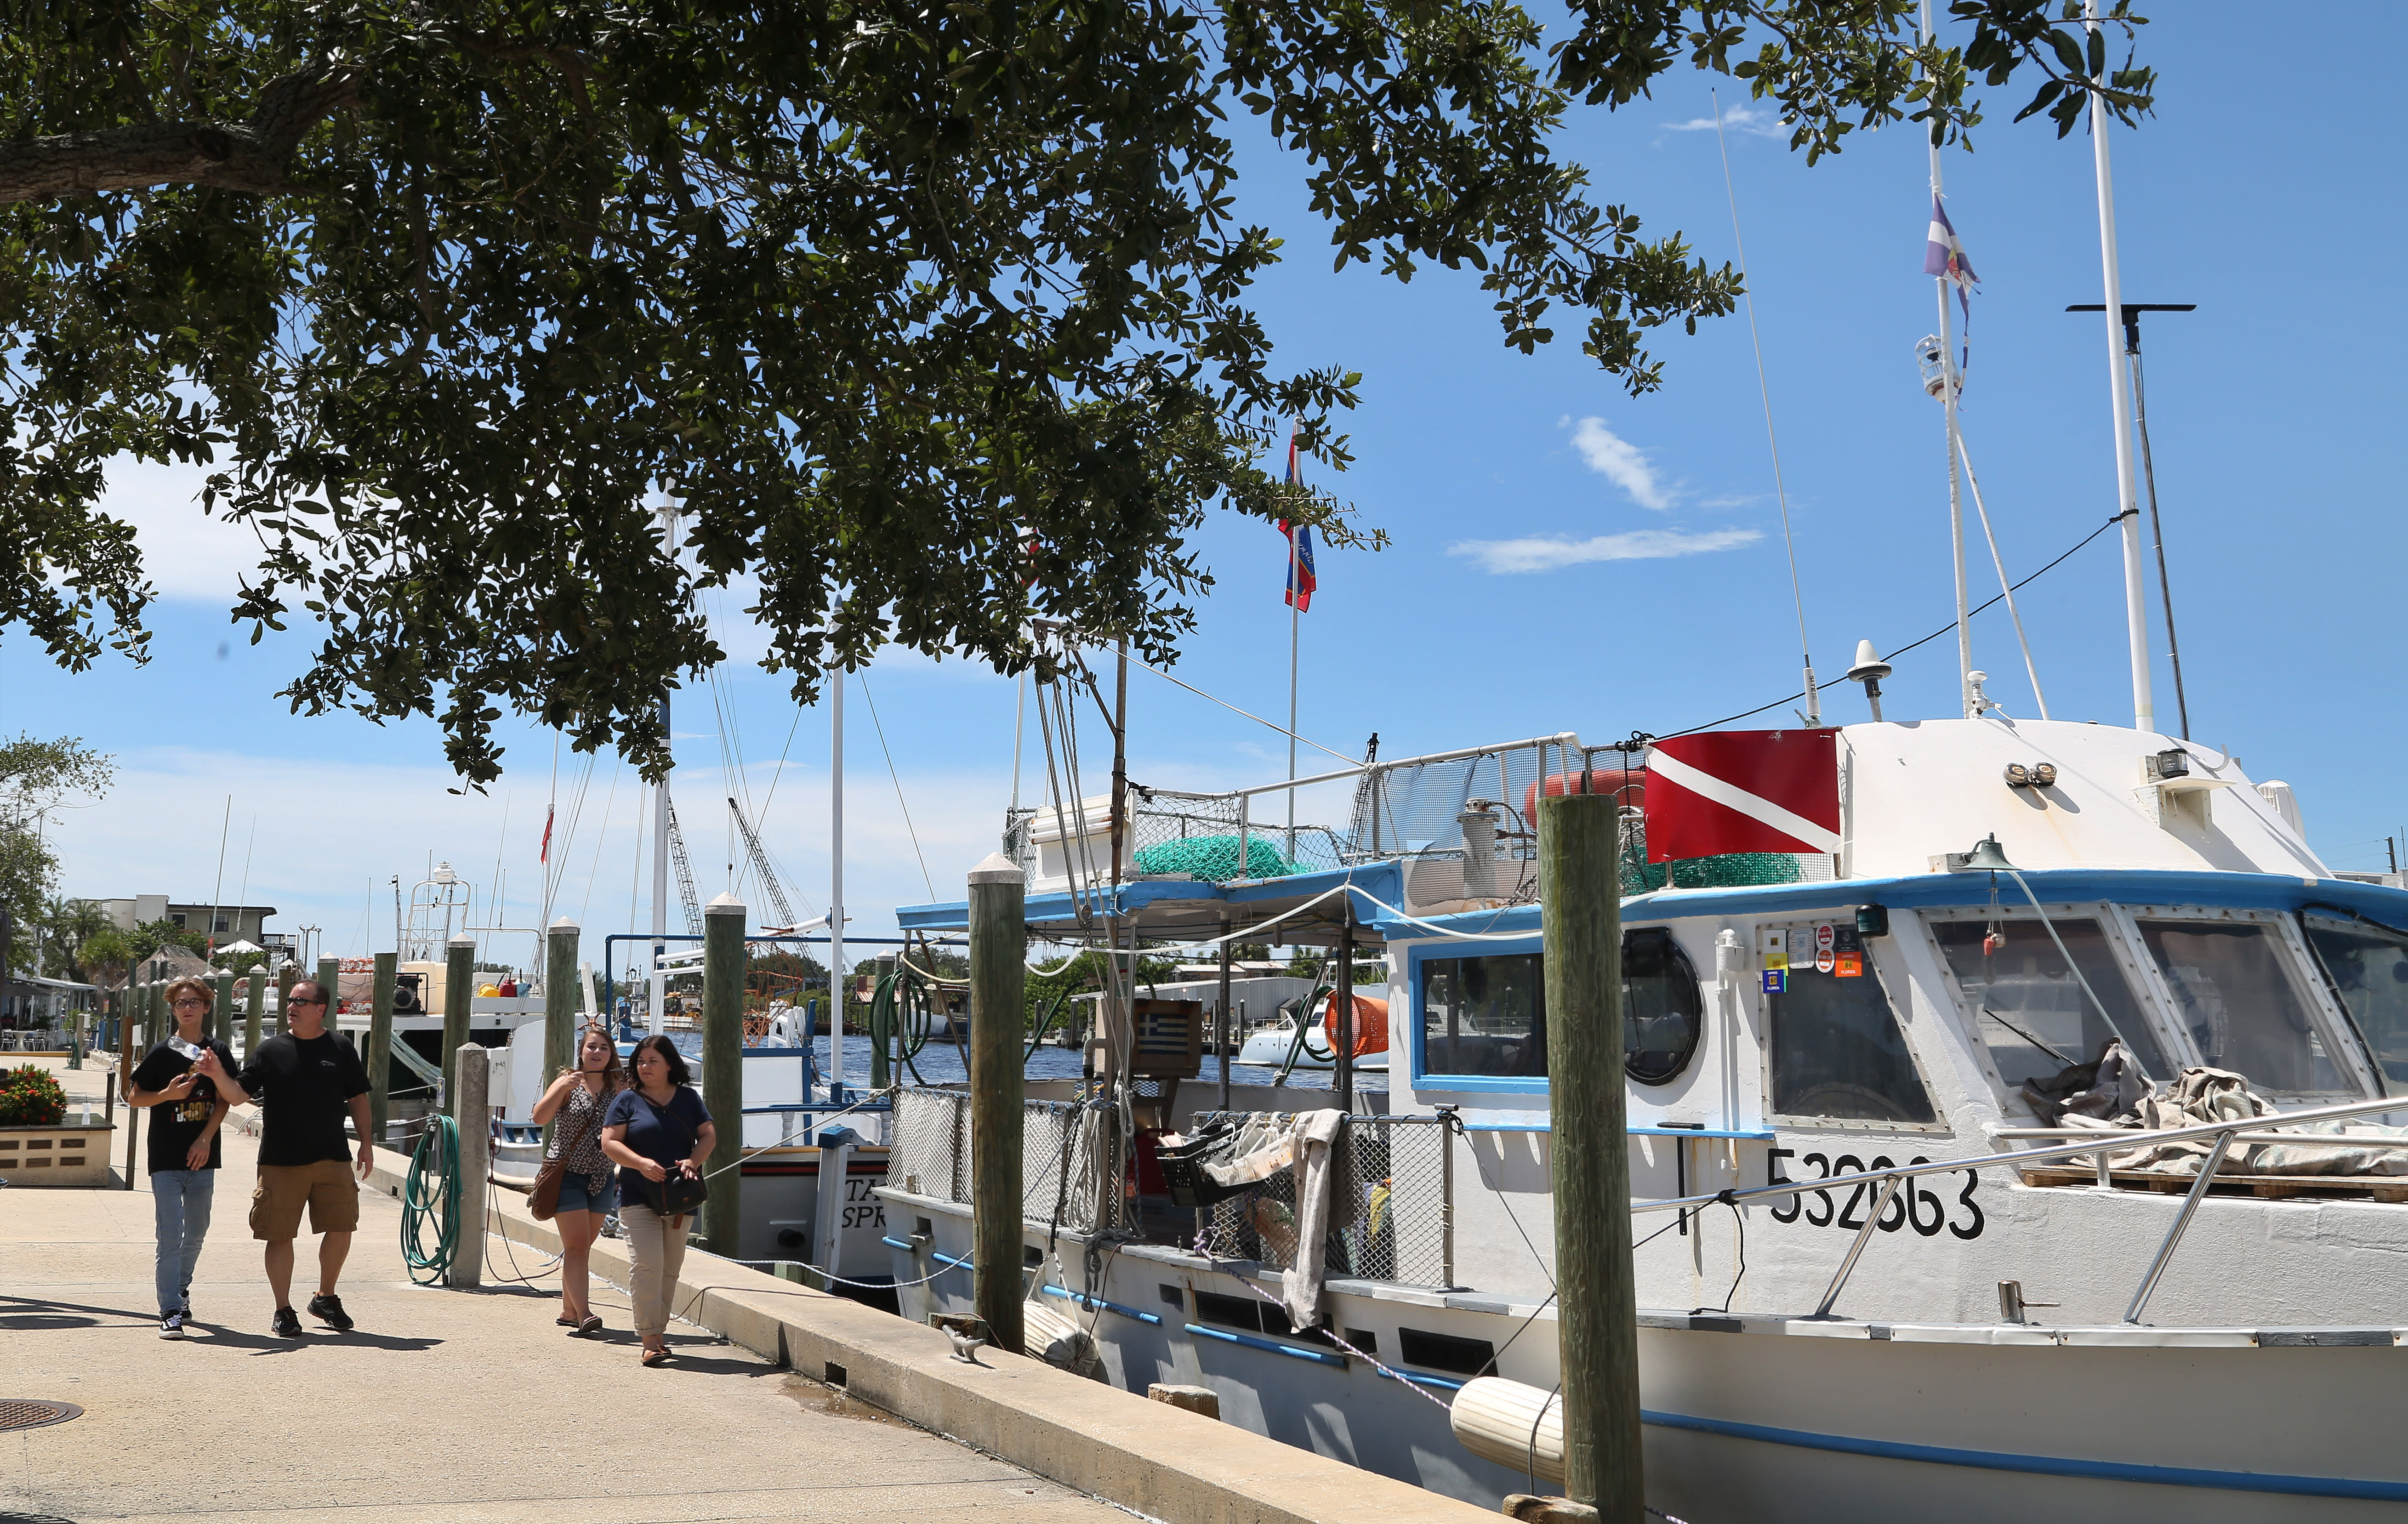 Visitors walk along the historic Tarpon Springs Sponge Docks on the Anclote River and Dodecanese Boulevard. Working sponge boats harvest sponges from the Gulf of Mexico which are sold around the world. 